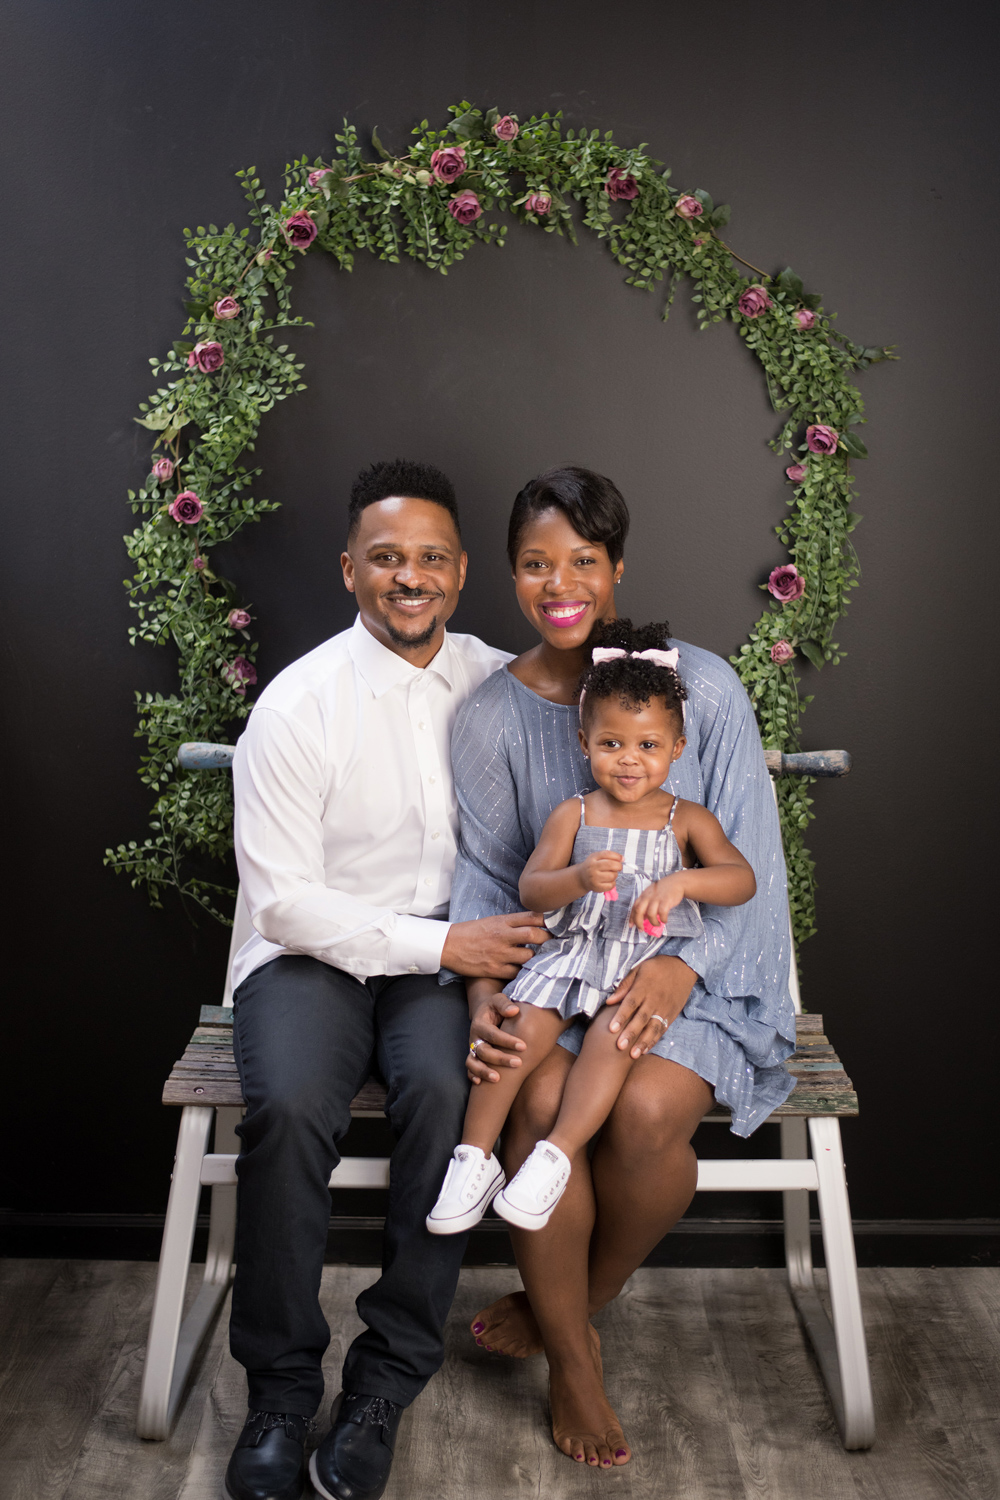 A Chicago family smiles in front of a wreath during a photo session.